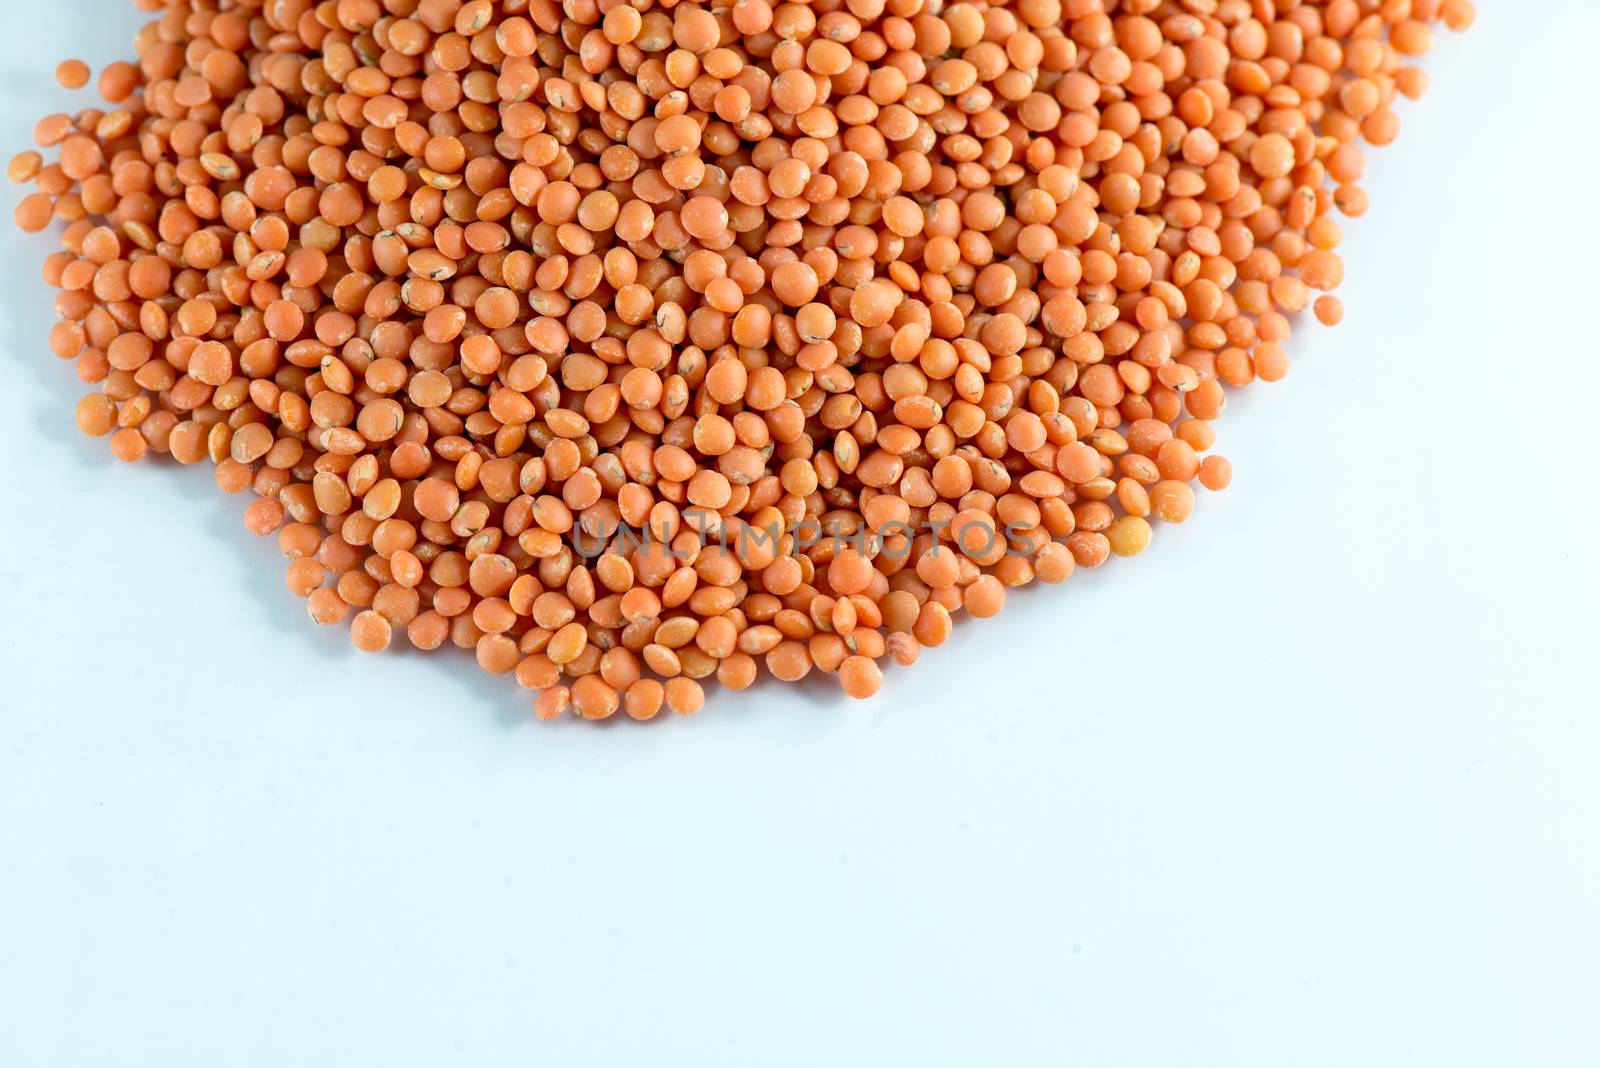 Channa dal, famous Indian legume also called yellow Pigeon peas